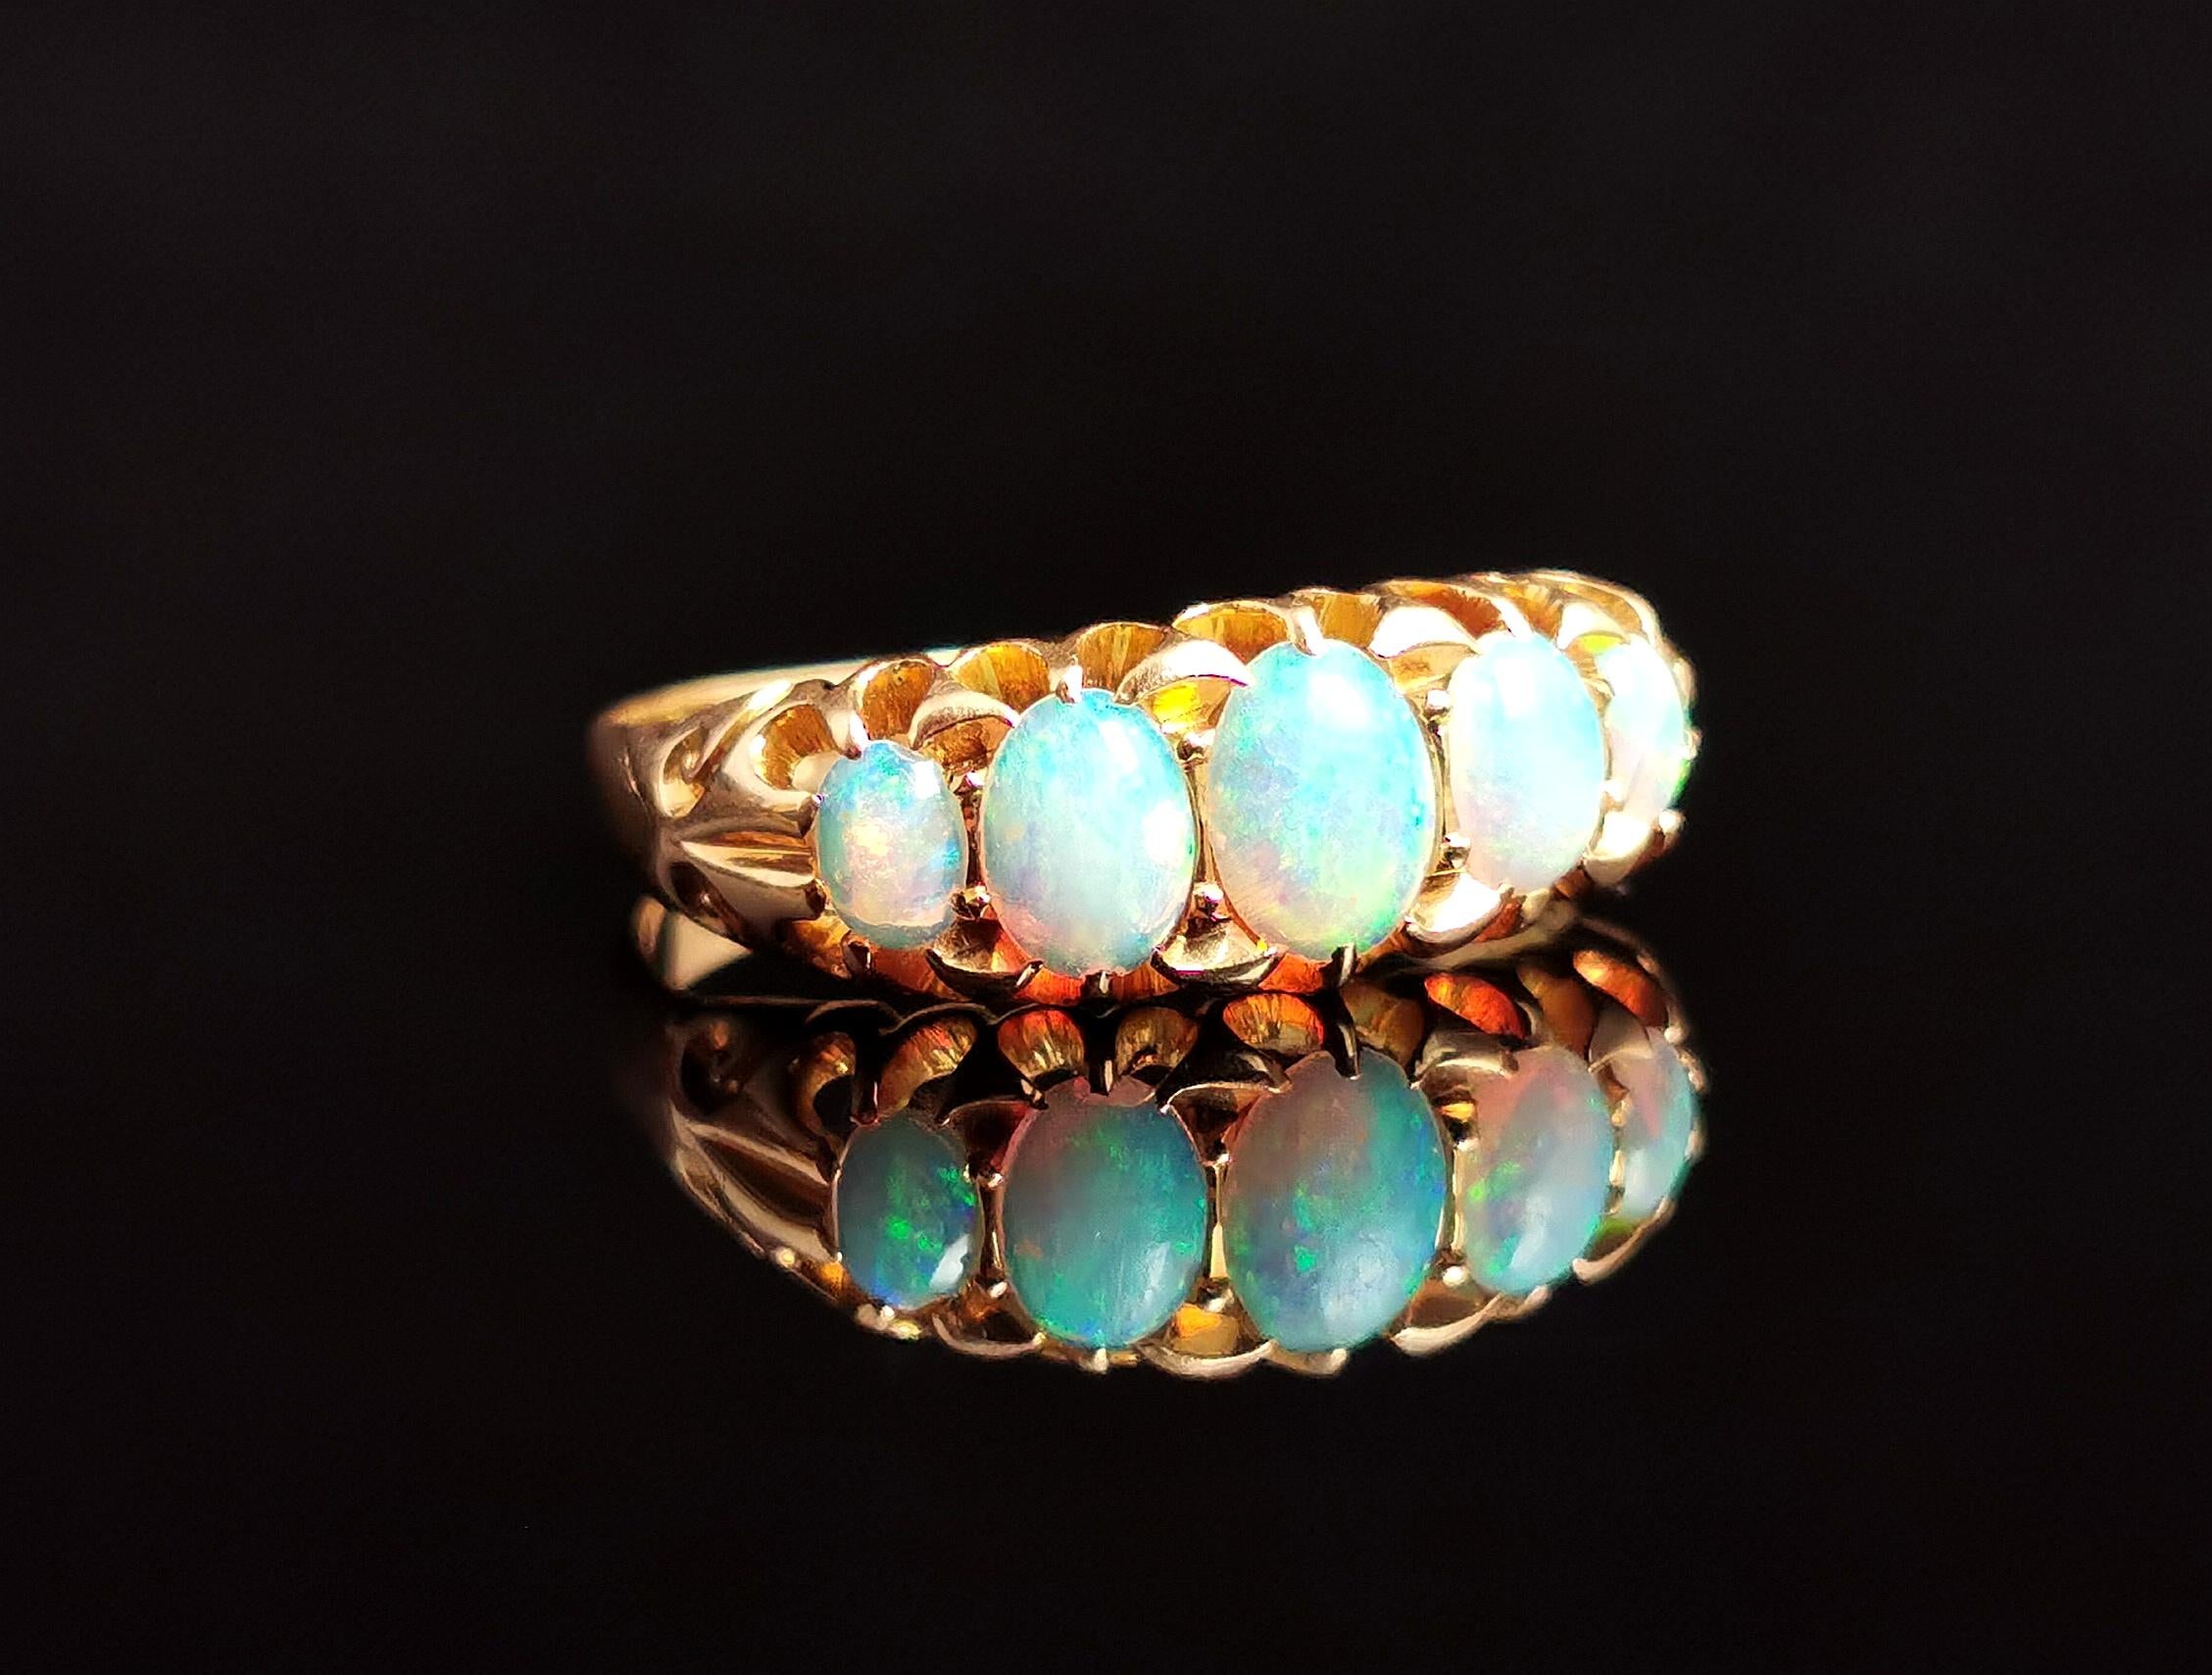 An attractive antique, Edwardian era opal five stone ring.

A rich 18kt yellow gold band with a boat head style setting.

The face is set with five beautiful oval opal cabochons, graduating in size from the centre opal.

The opals are just stunning